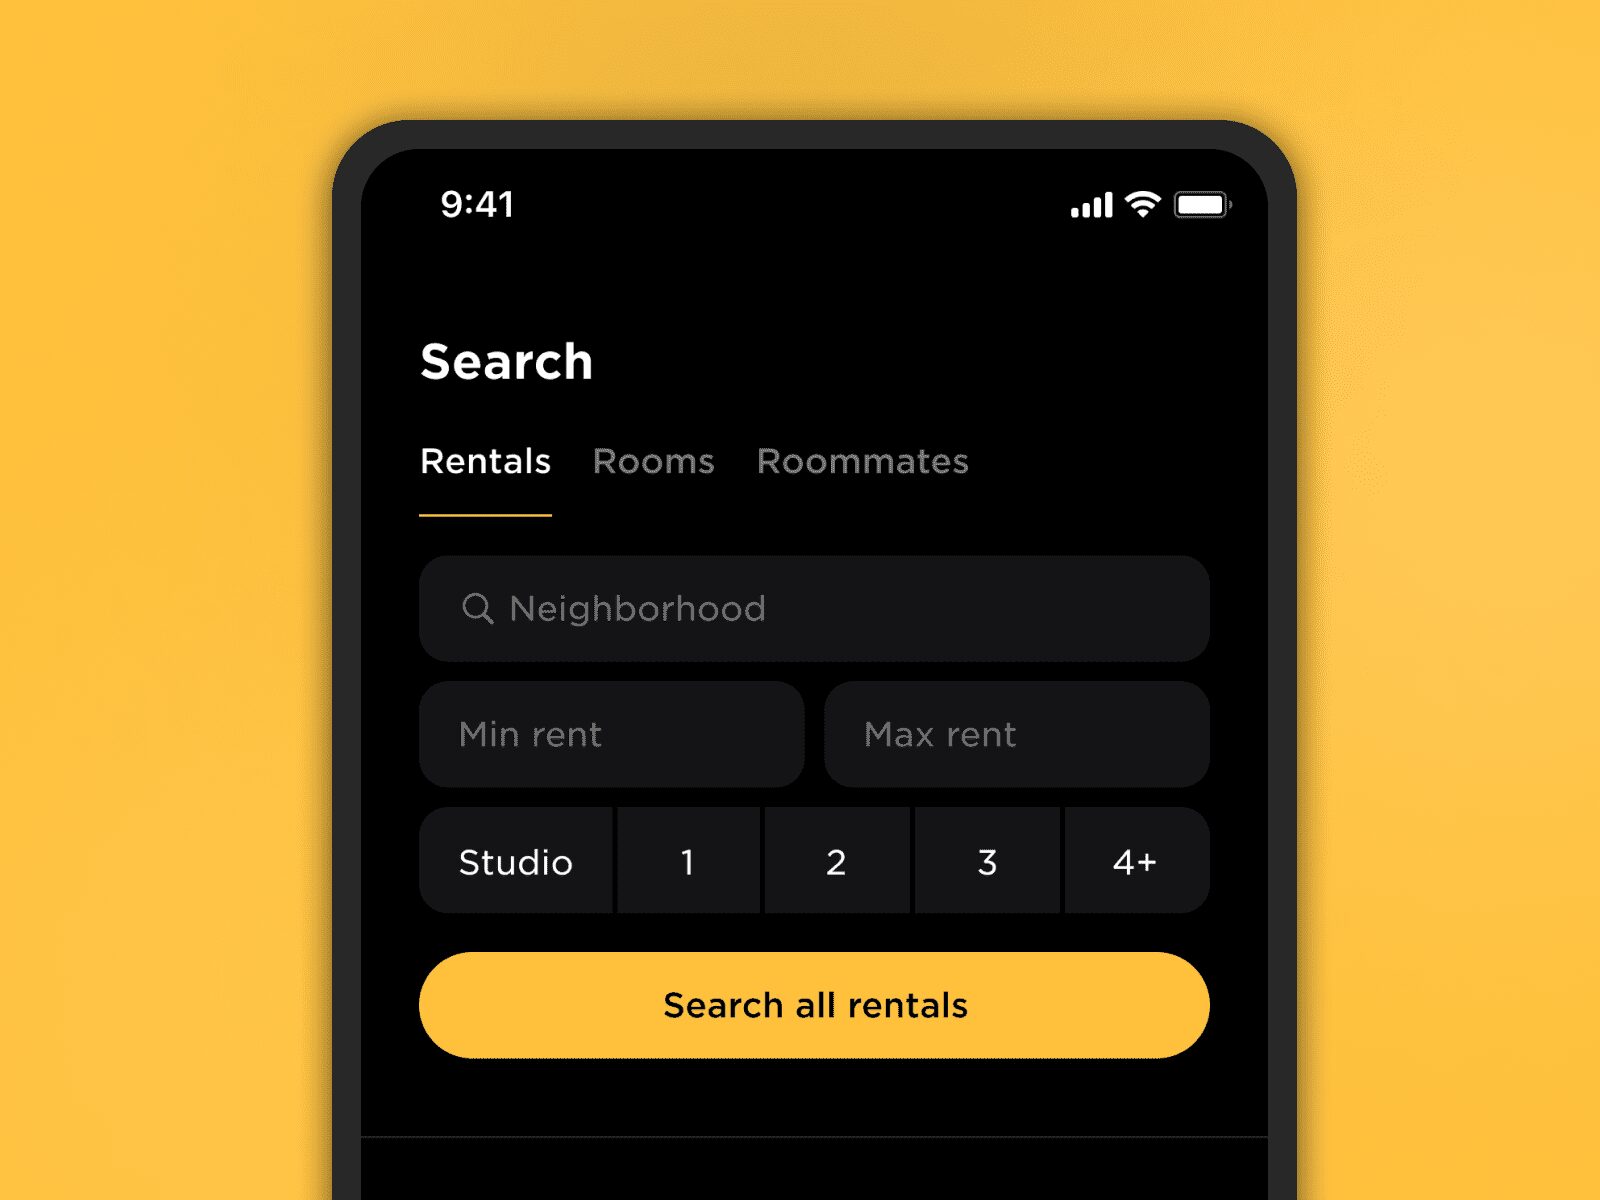 Simple backgrounds. Mobile designers create monochrome or blurry experiences that make the app’s navigation and features more expressive. This also reduces loading time and makes user interaction more comfortable.